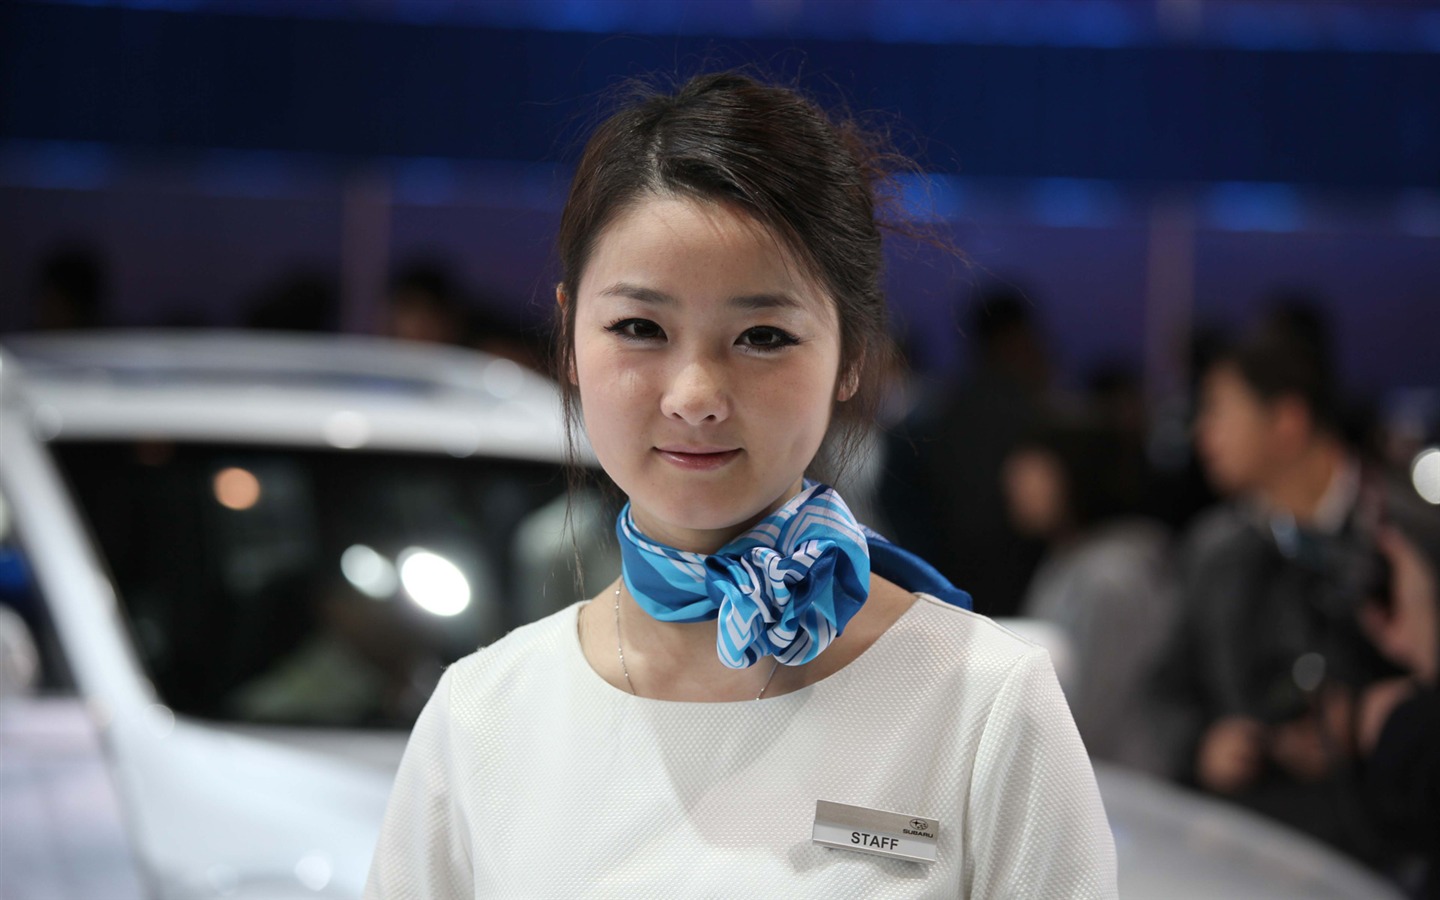 2010 Beijing International Auto Show beauty (1) (the wind chasing the clouds works) #22 - 1440x900